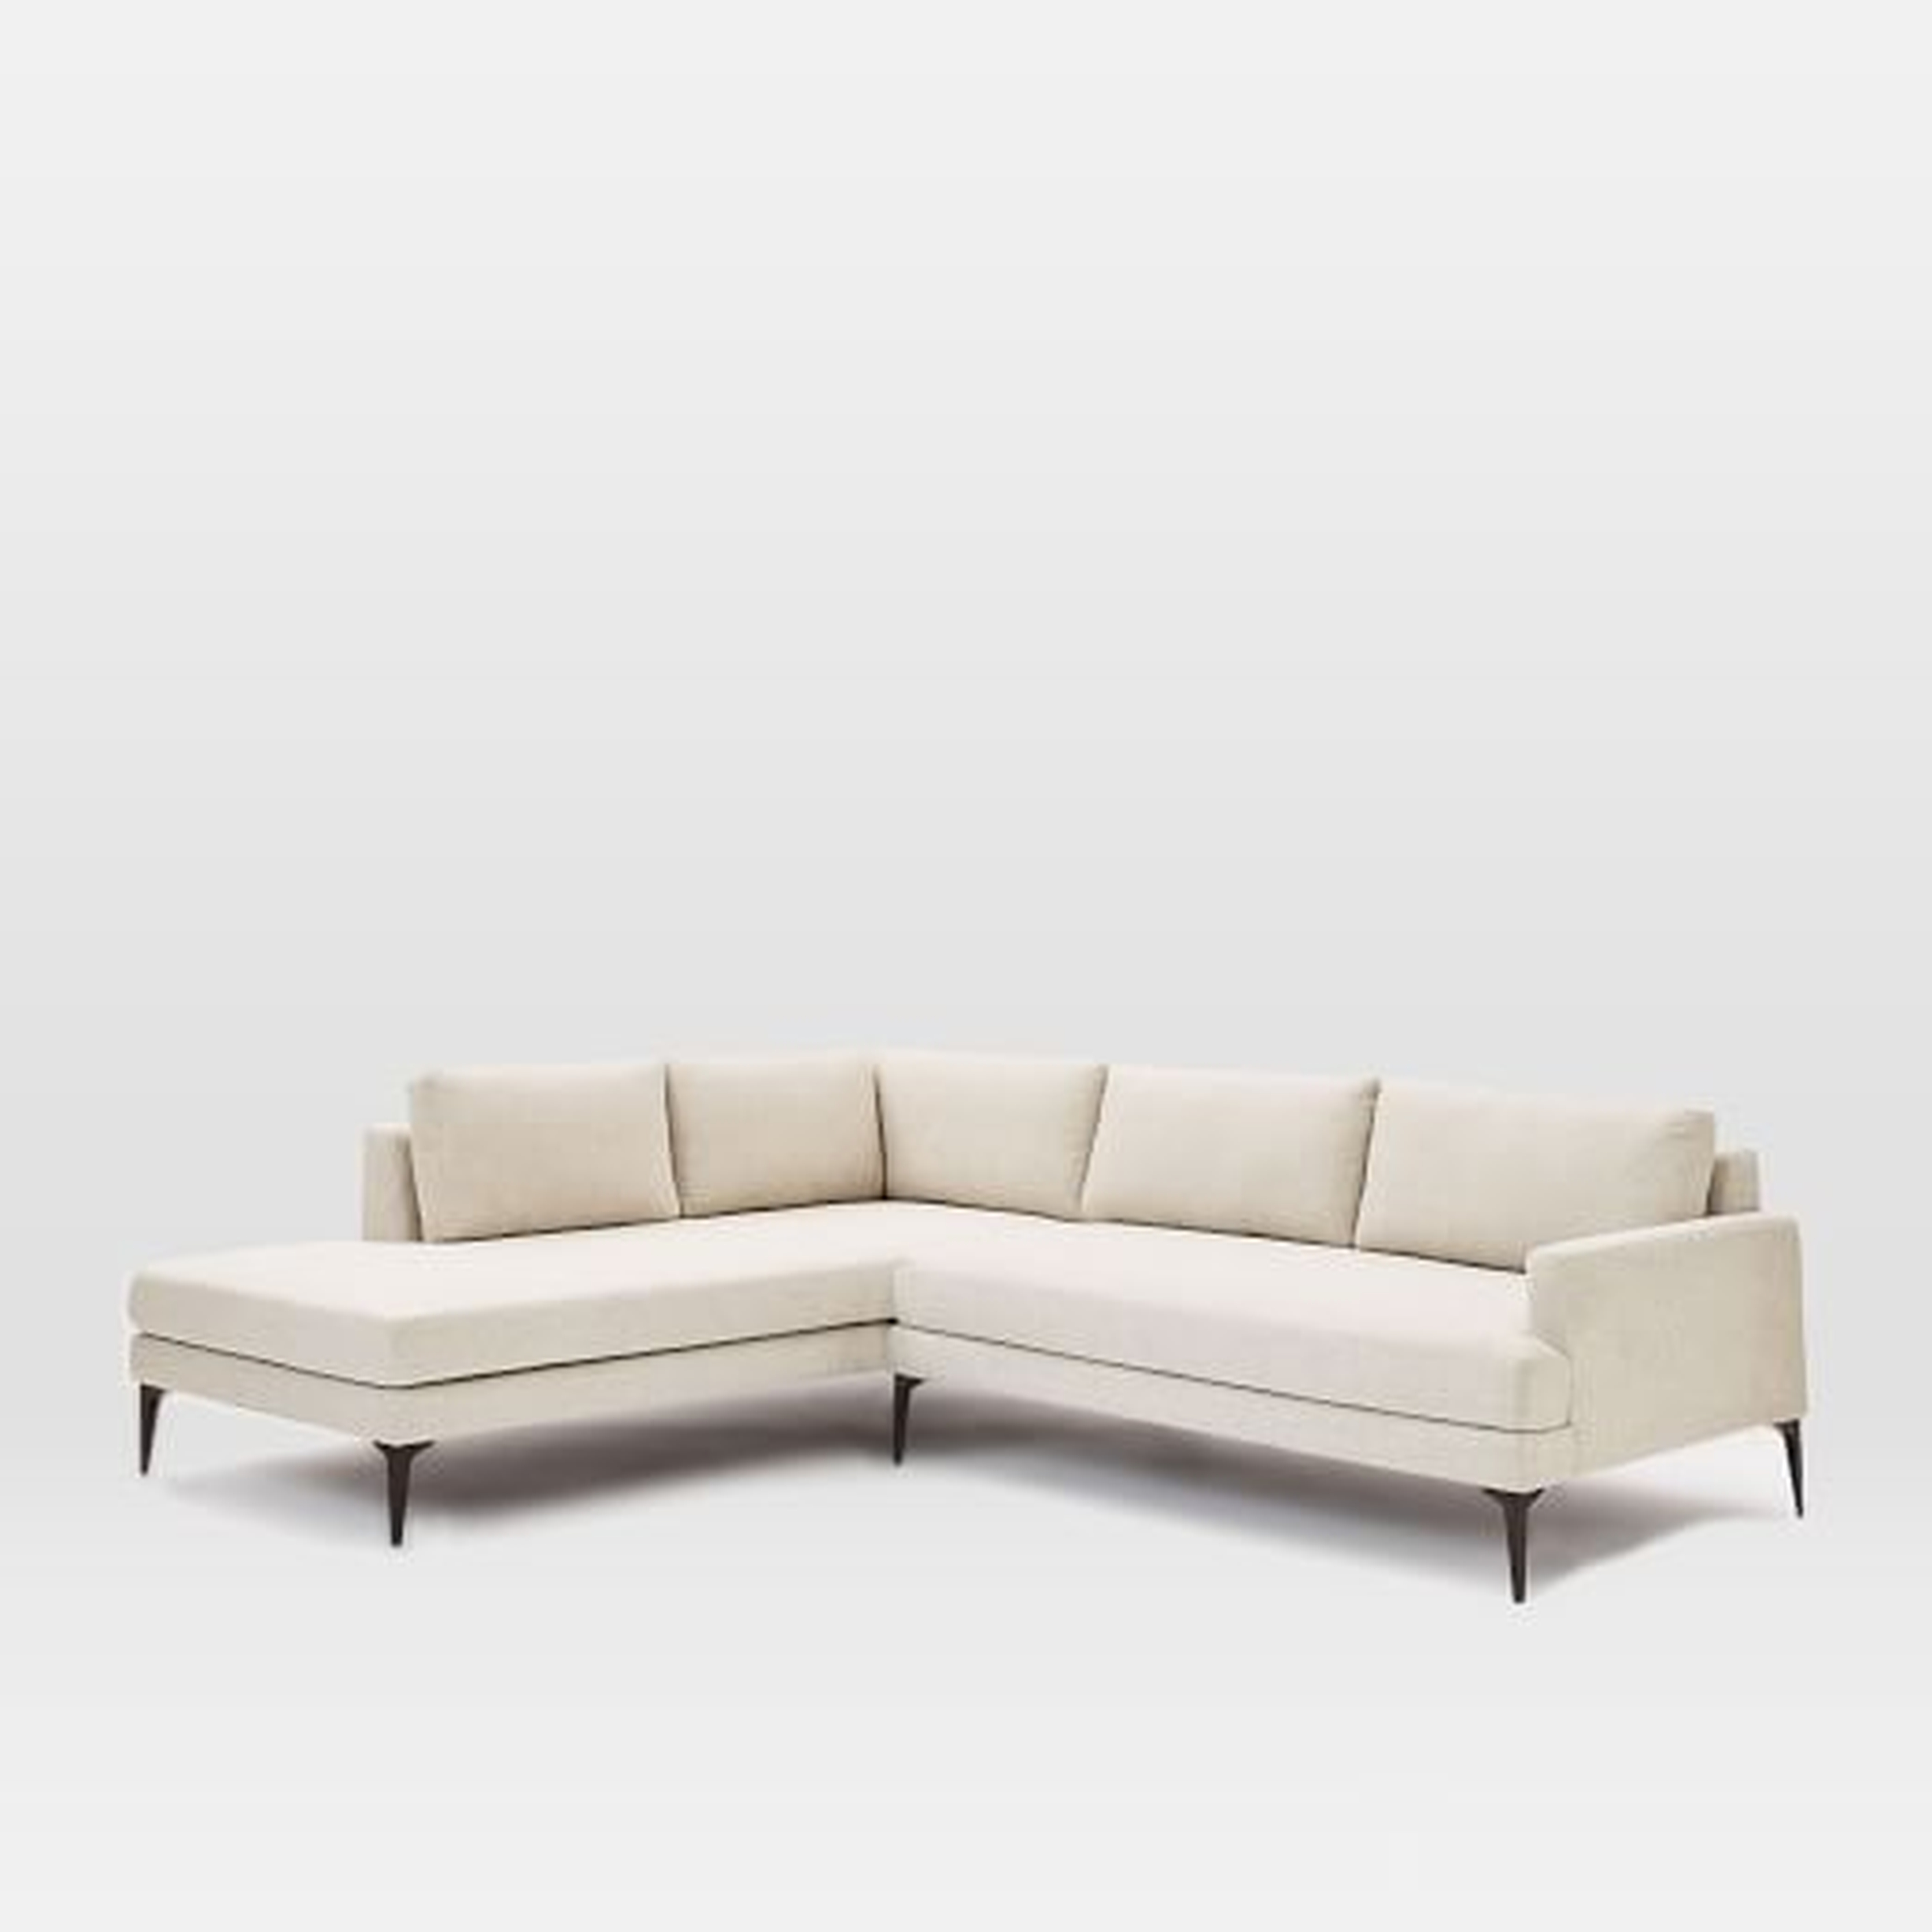 Andes Terminal Chaise Sectional - Left Terminal Chaise 2-piece sectional - West Elm